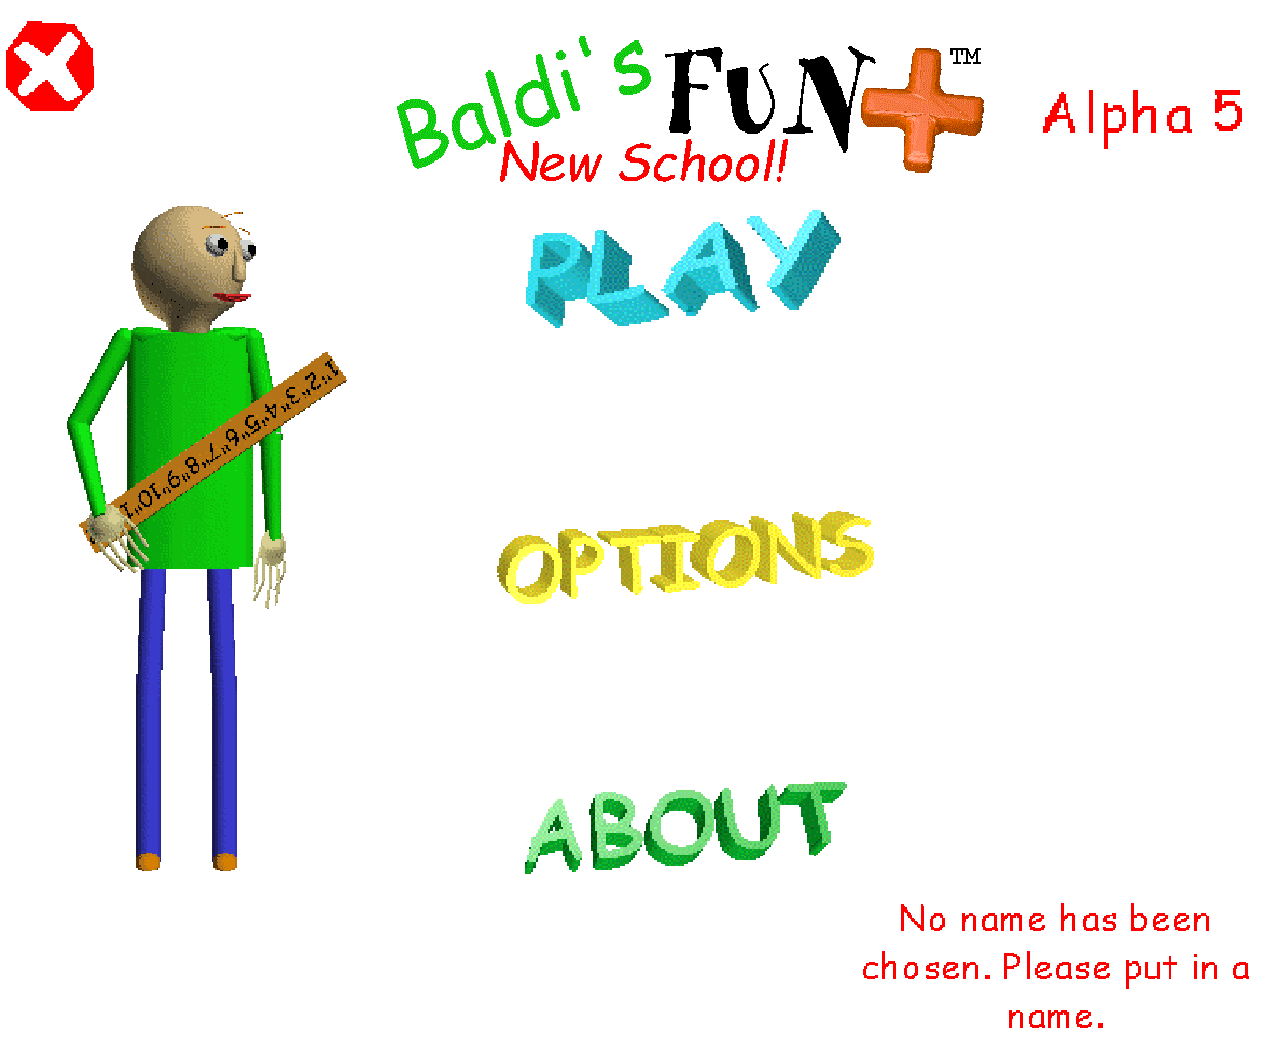 How To Install Baldi's Mods In Android  1st Prize Helps Baldi's Android  Version 